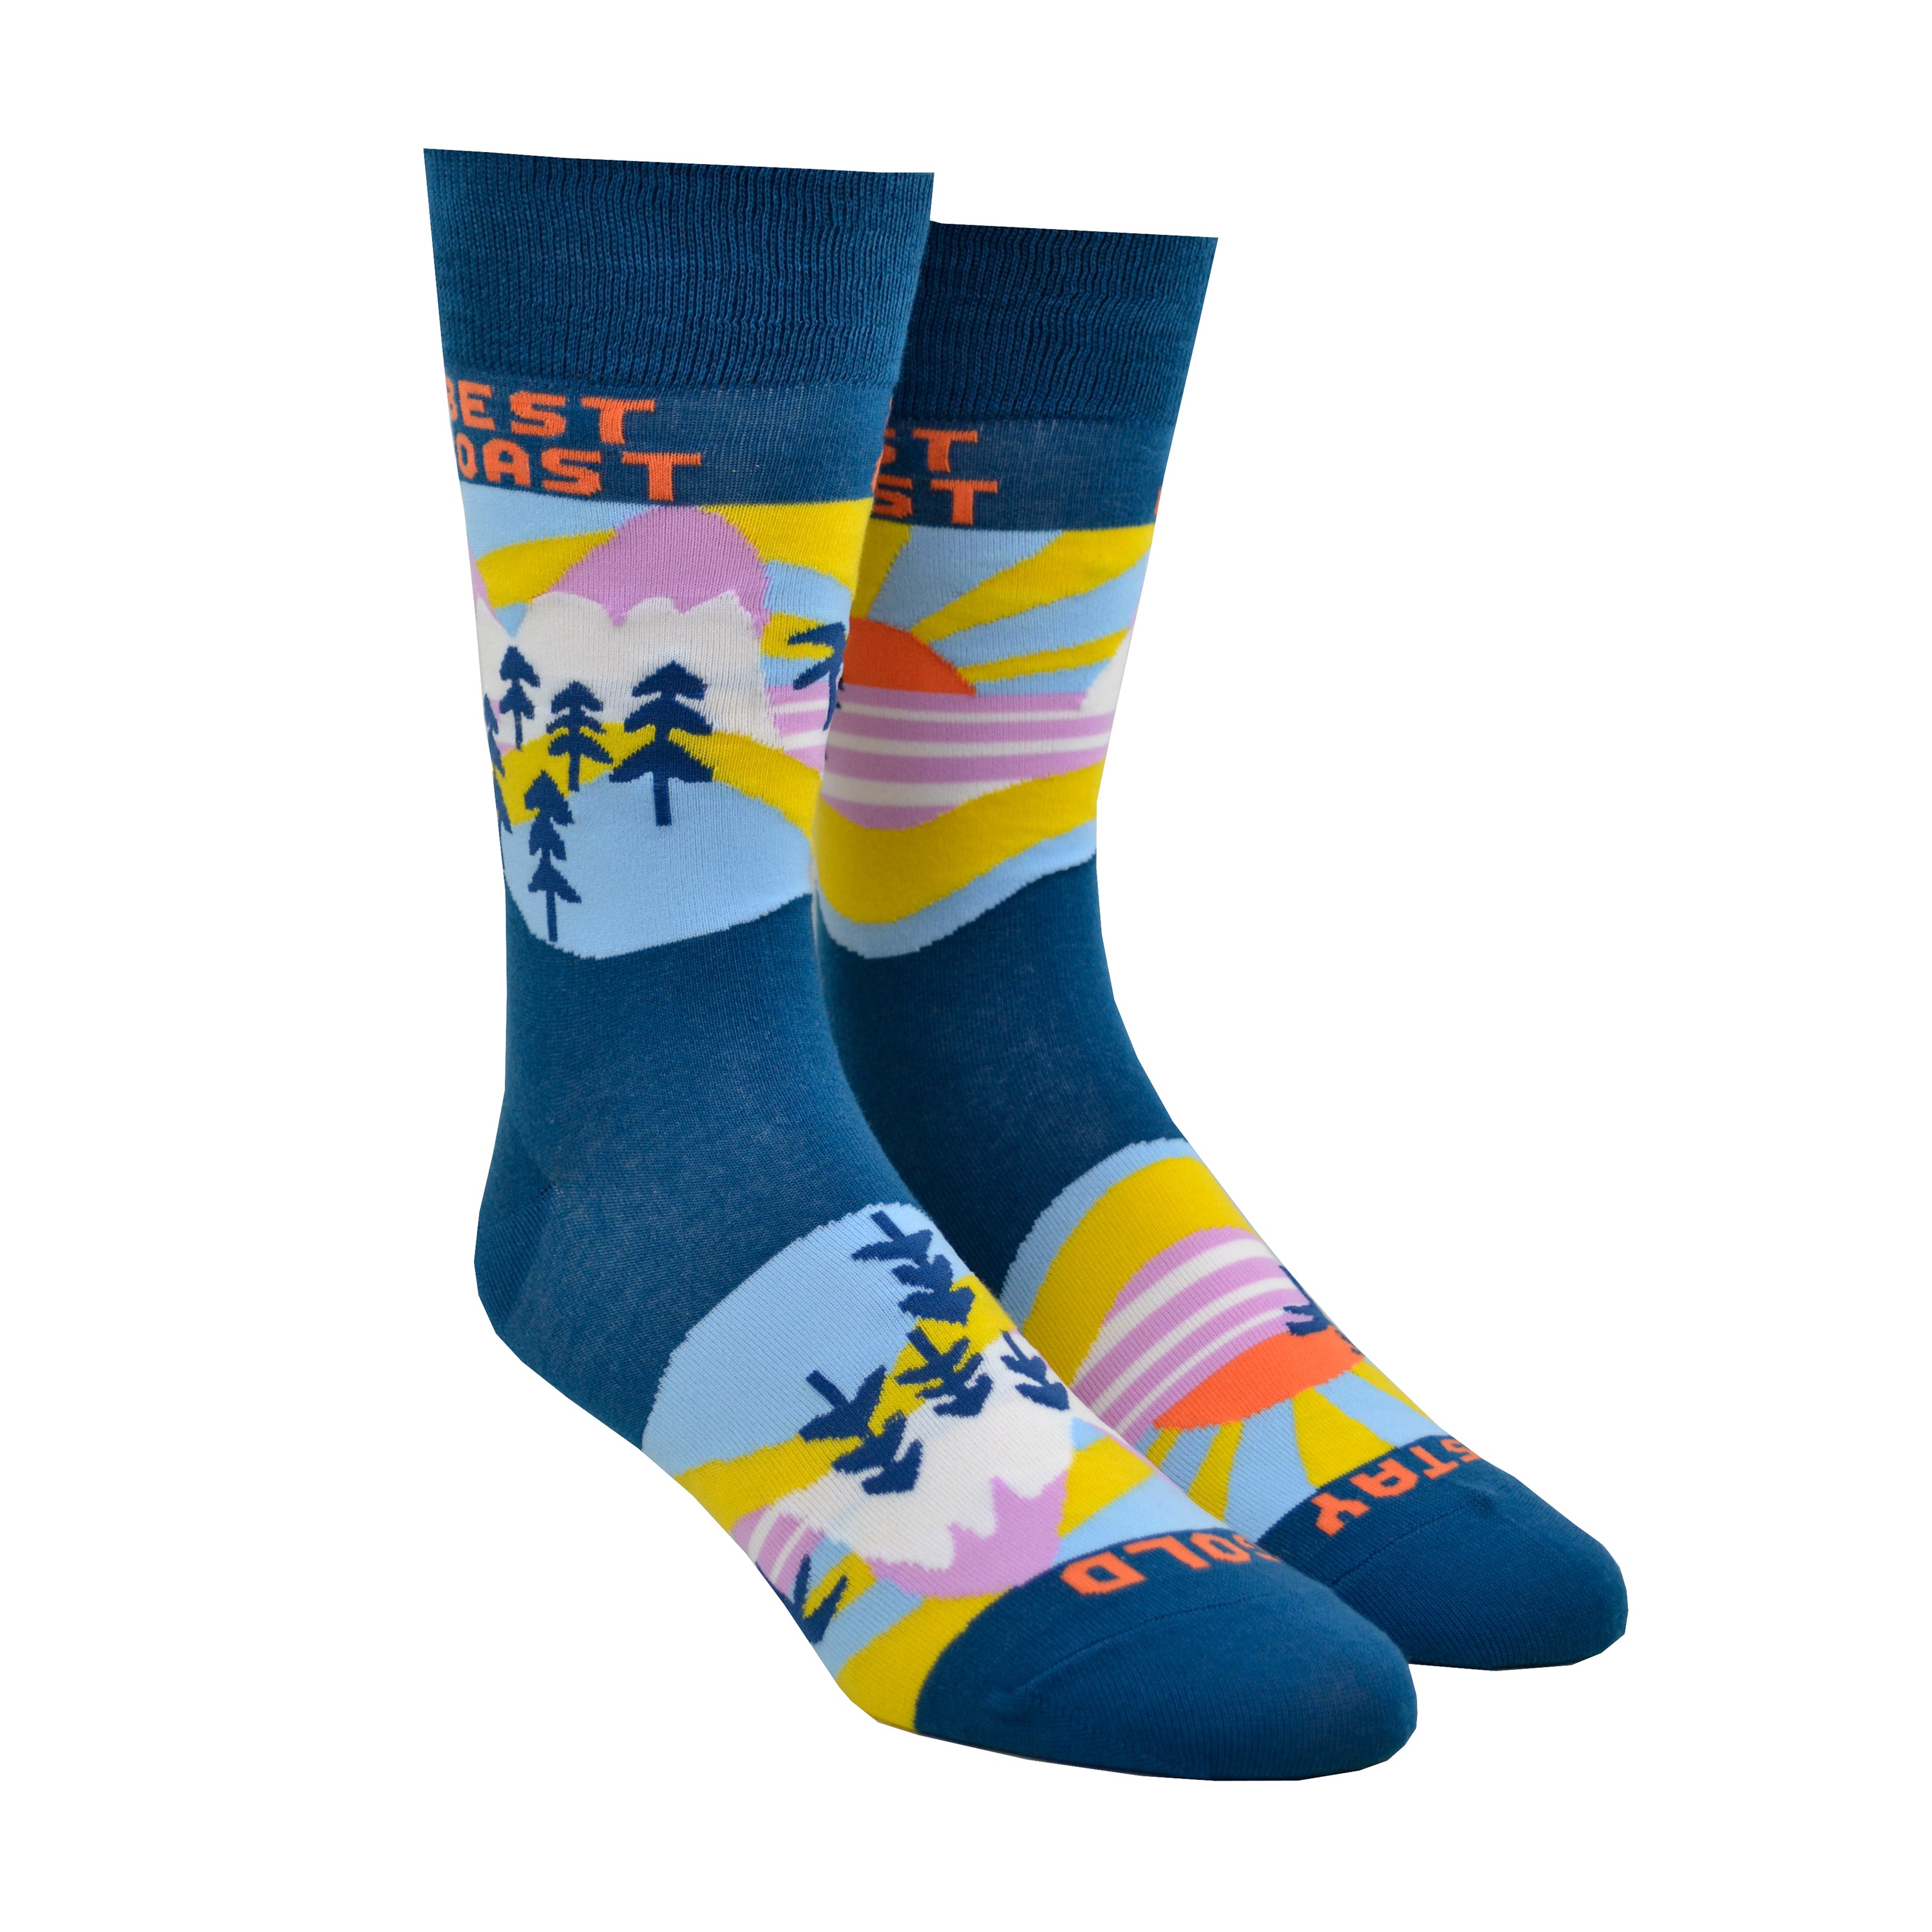 Shown on a leg form, these blue cotton men's novelty crew socks by the brand Yellow Owl Workshop feature an orange and yellow sun setting over a pink landscape with blue palm trees and say the words 